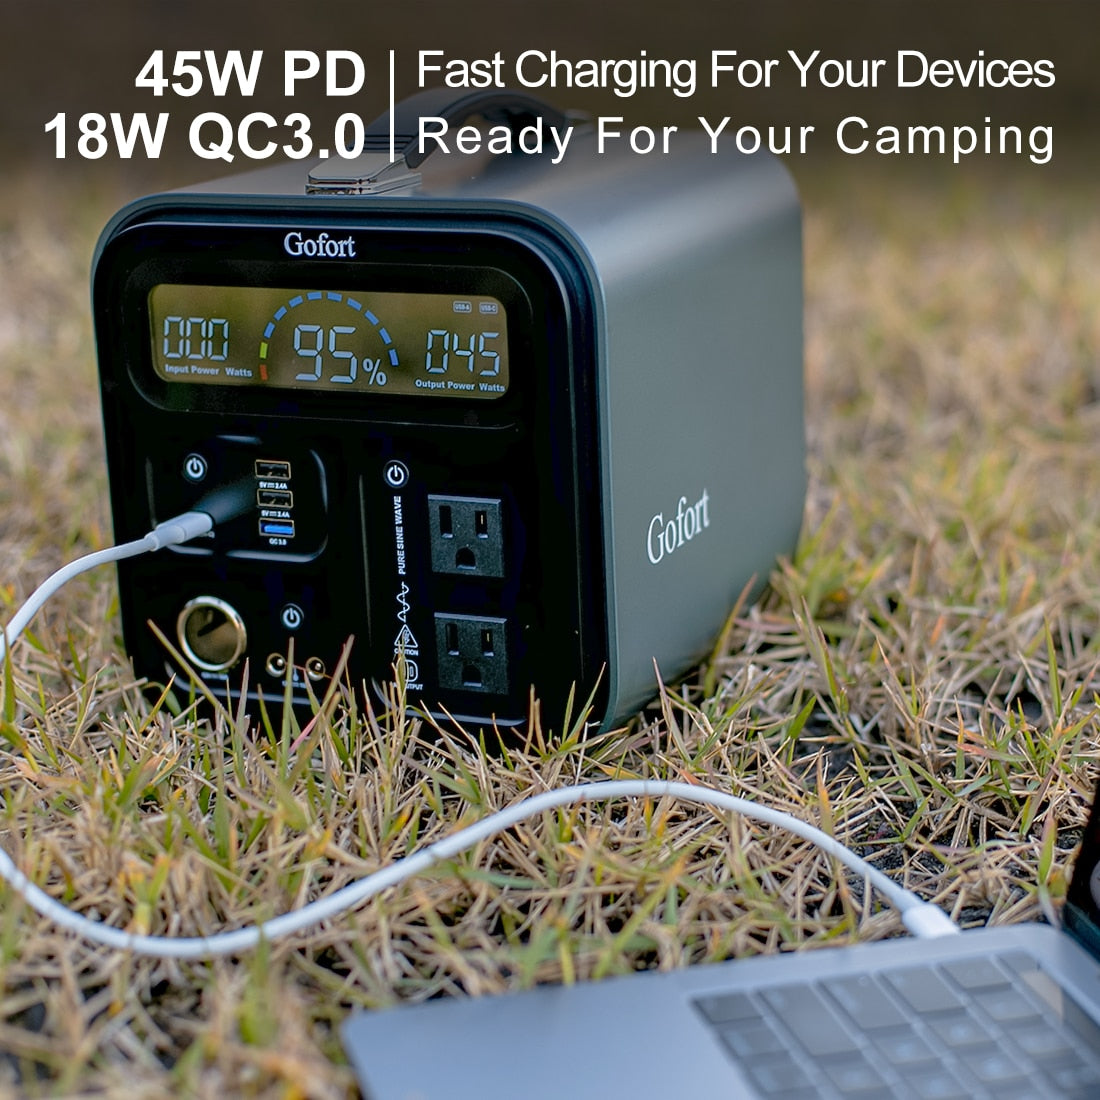 FF Flashfish UA550, PD Fast Charging For Your Devices 18W QC3.